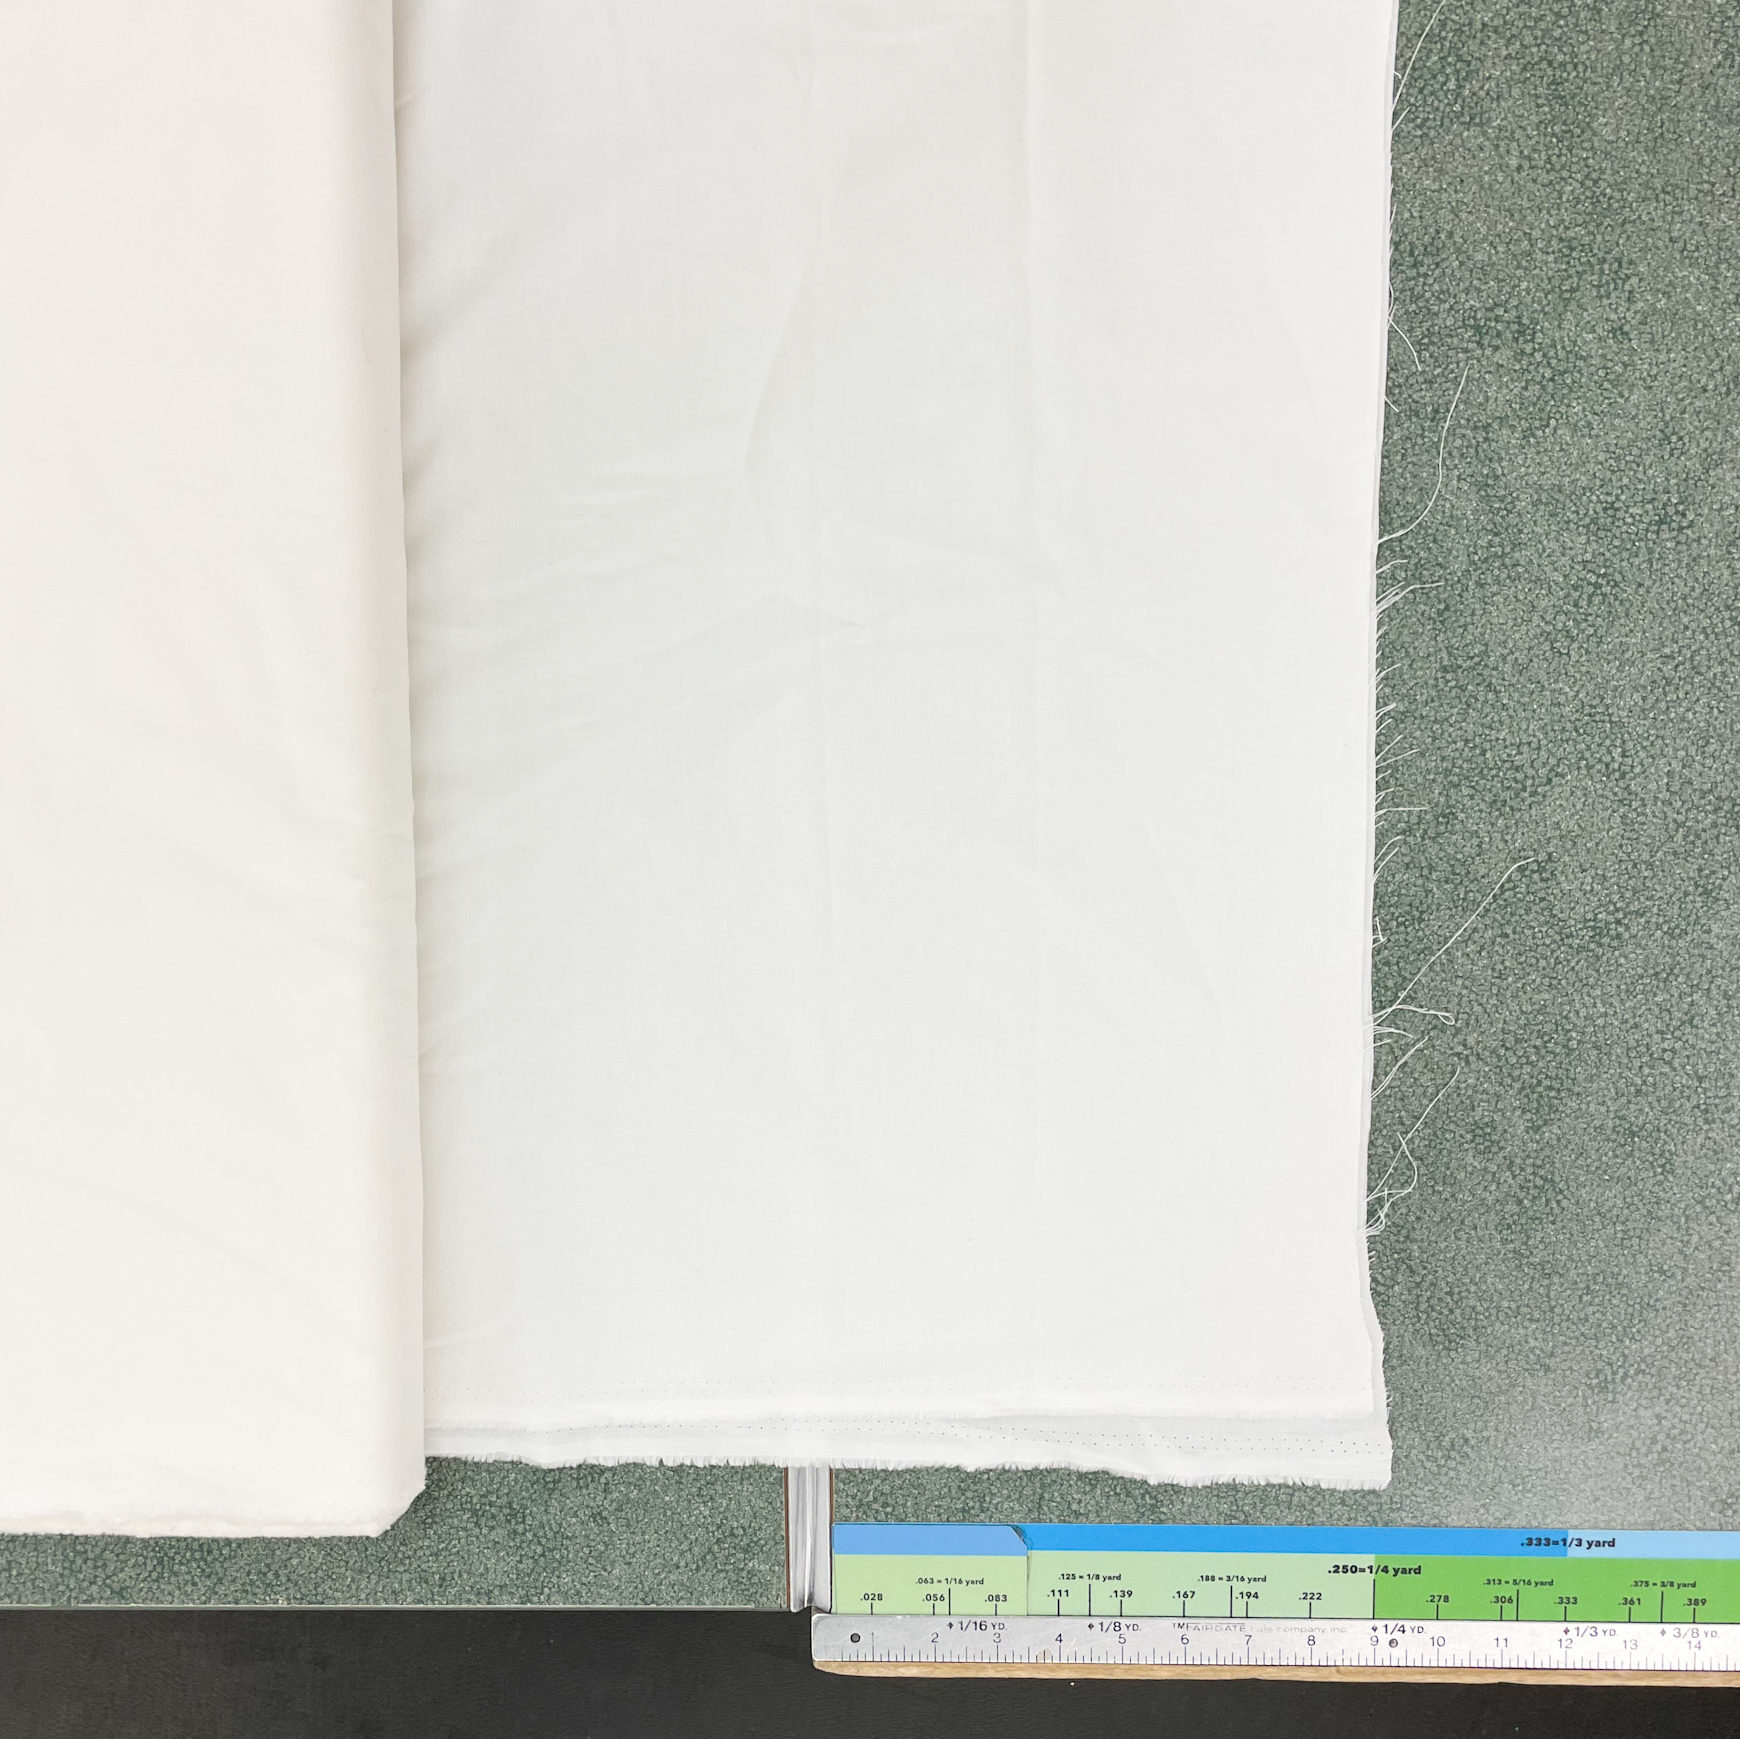 Image shows a cutting table with cream fabric positioned to be cut. At the bottom of the image is a ruler marking yard increments and inches. 